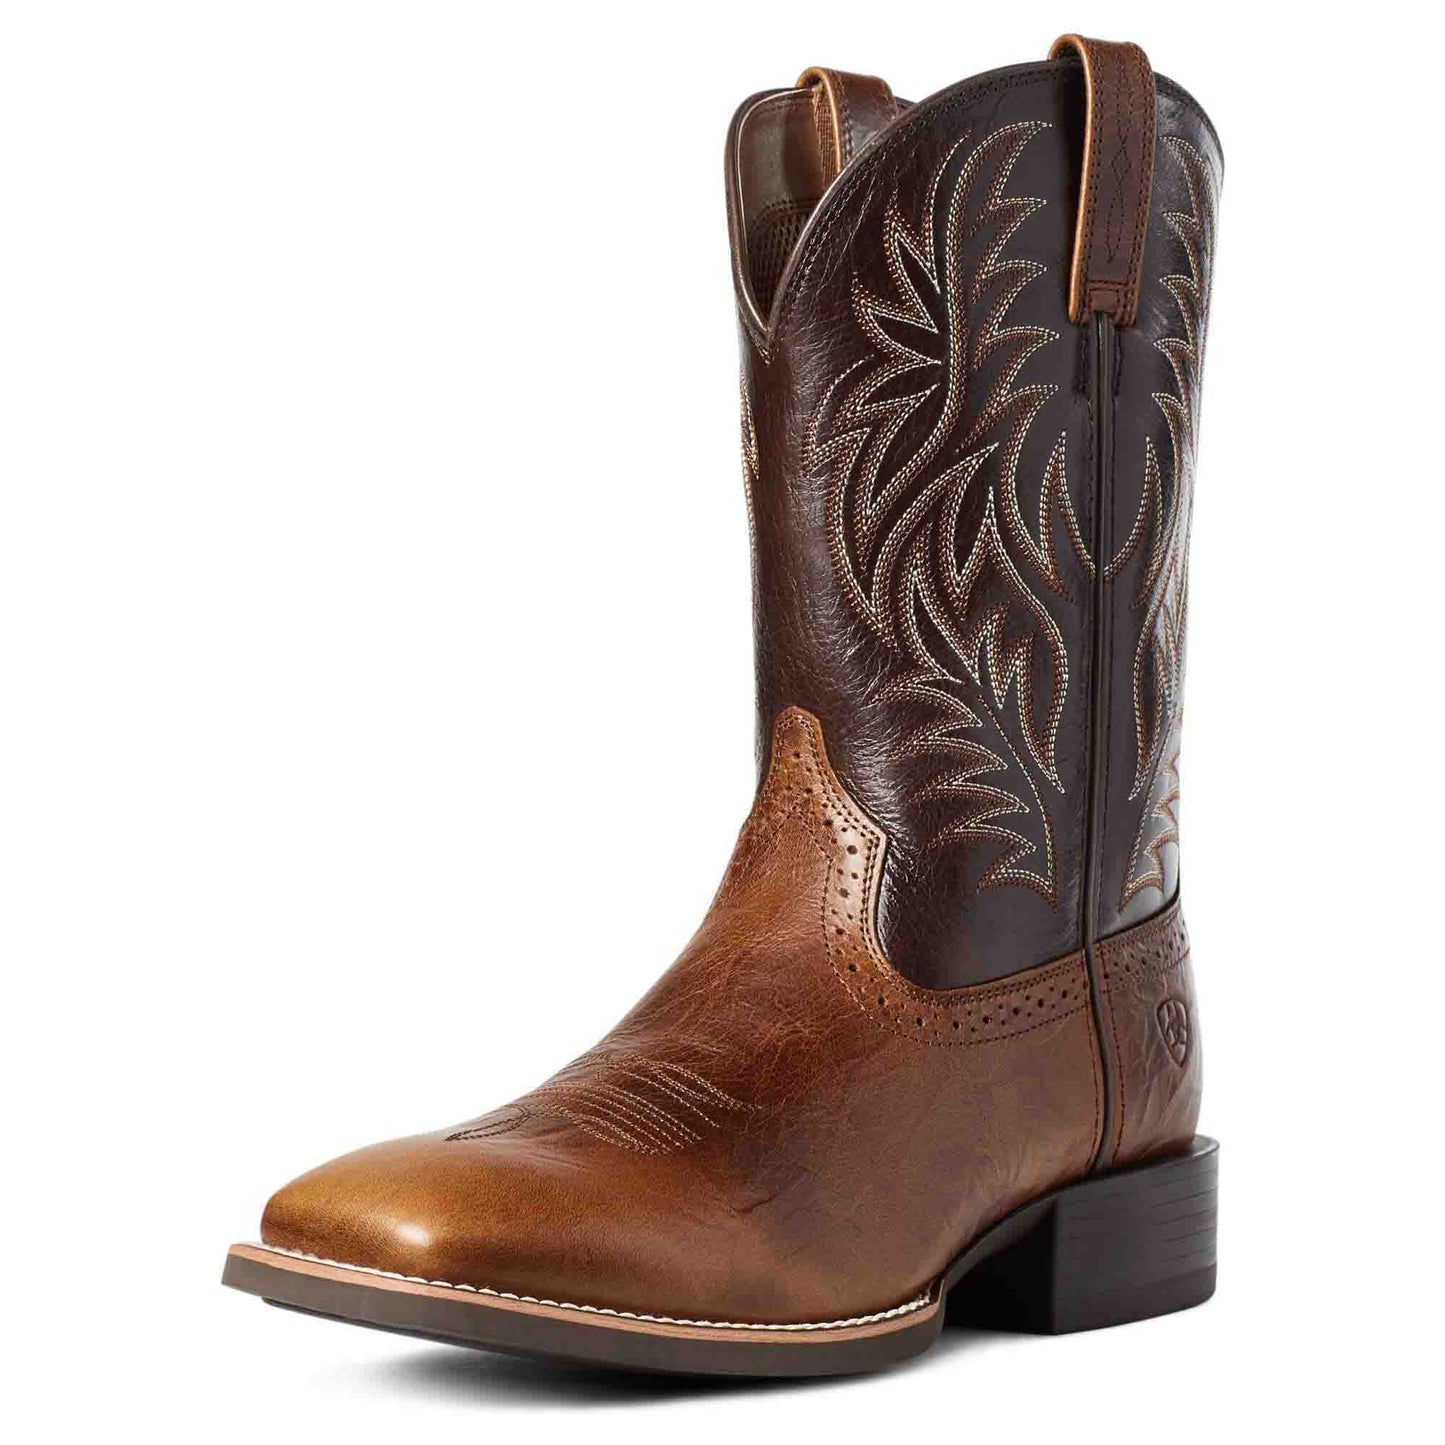 Mens Ariat Sport Western Wide Square Toe Boots Peanut Butter-Chaga Brown